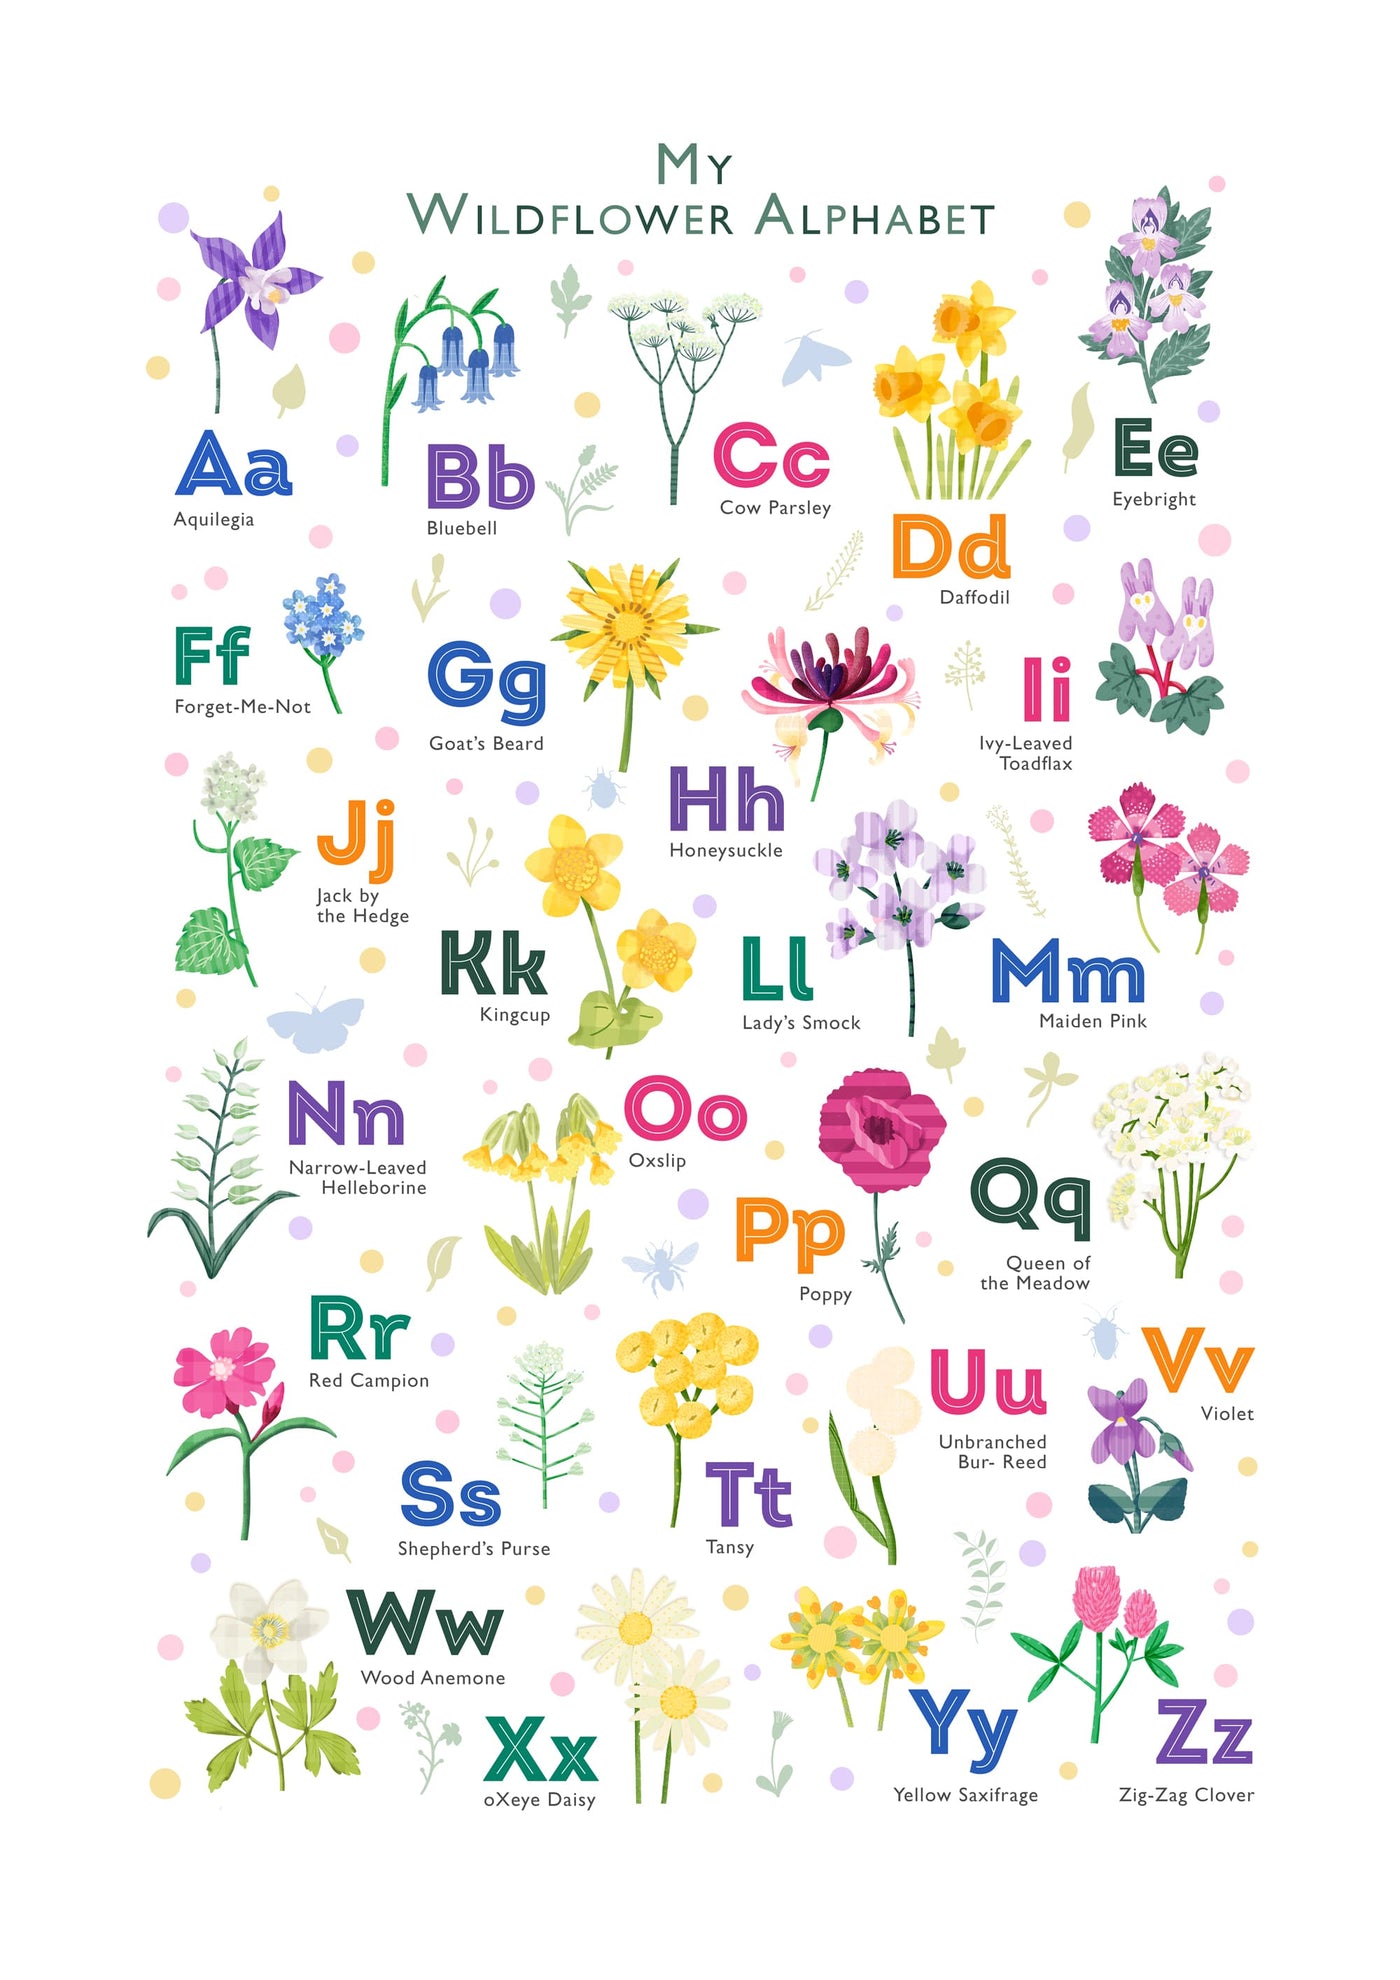 Close-up image of the personalized wildflower alphabet print featuring delicate illustrations of wildflowers corresponding to each letter of the alphabet.